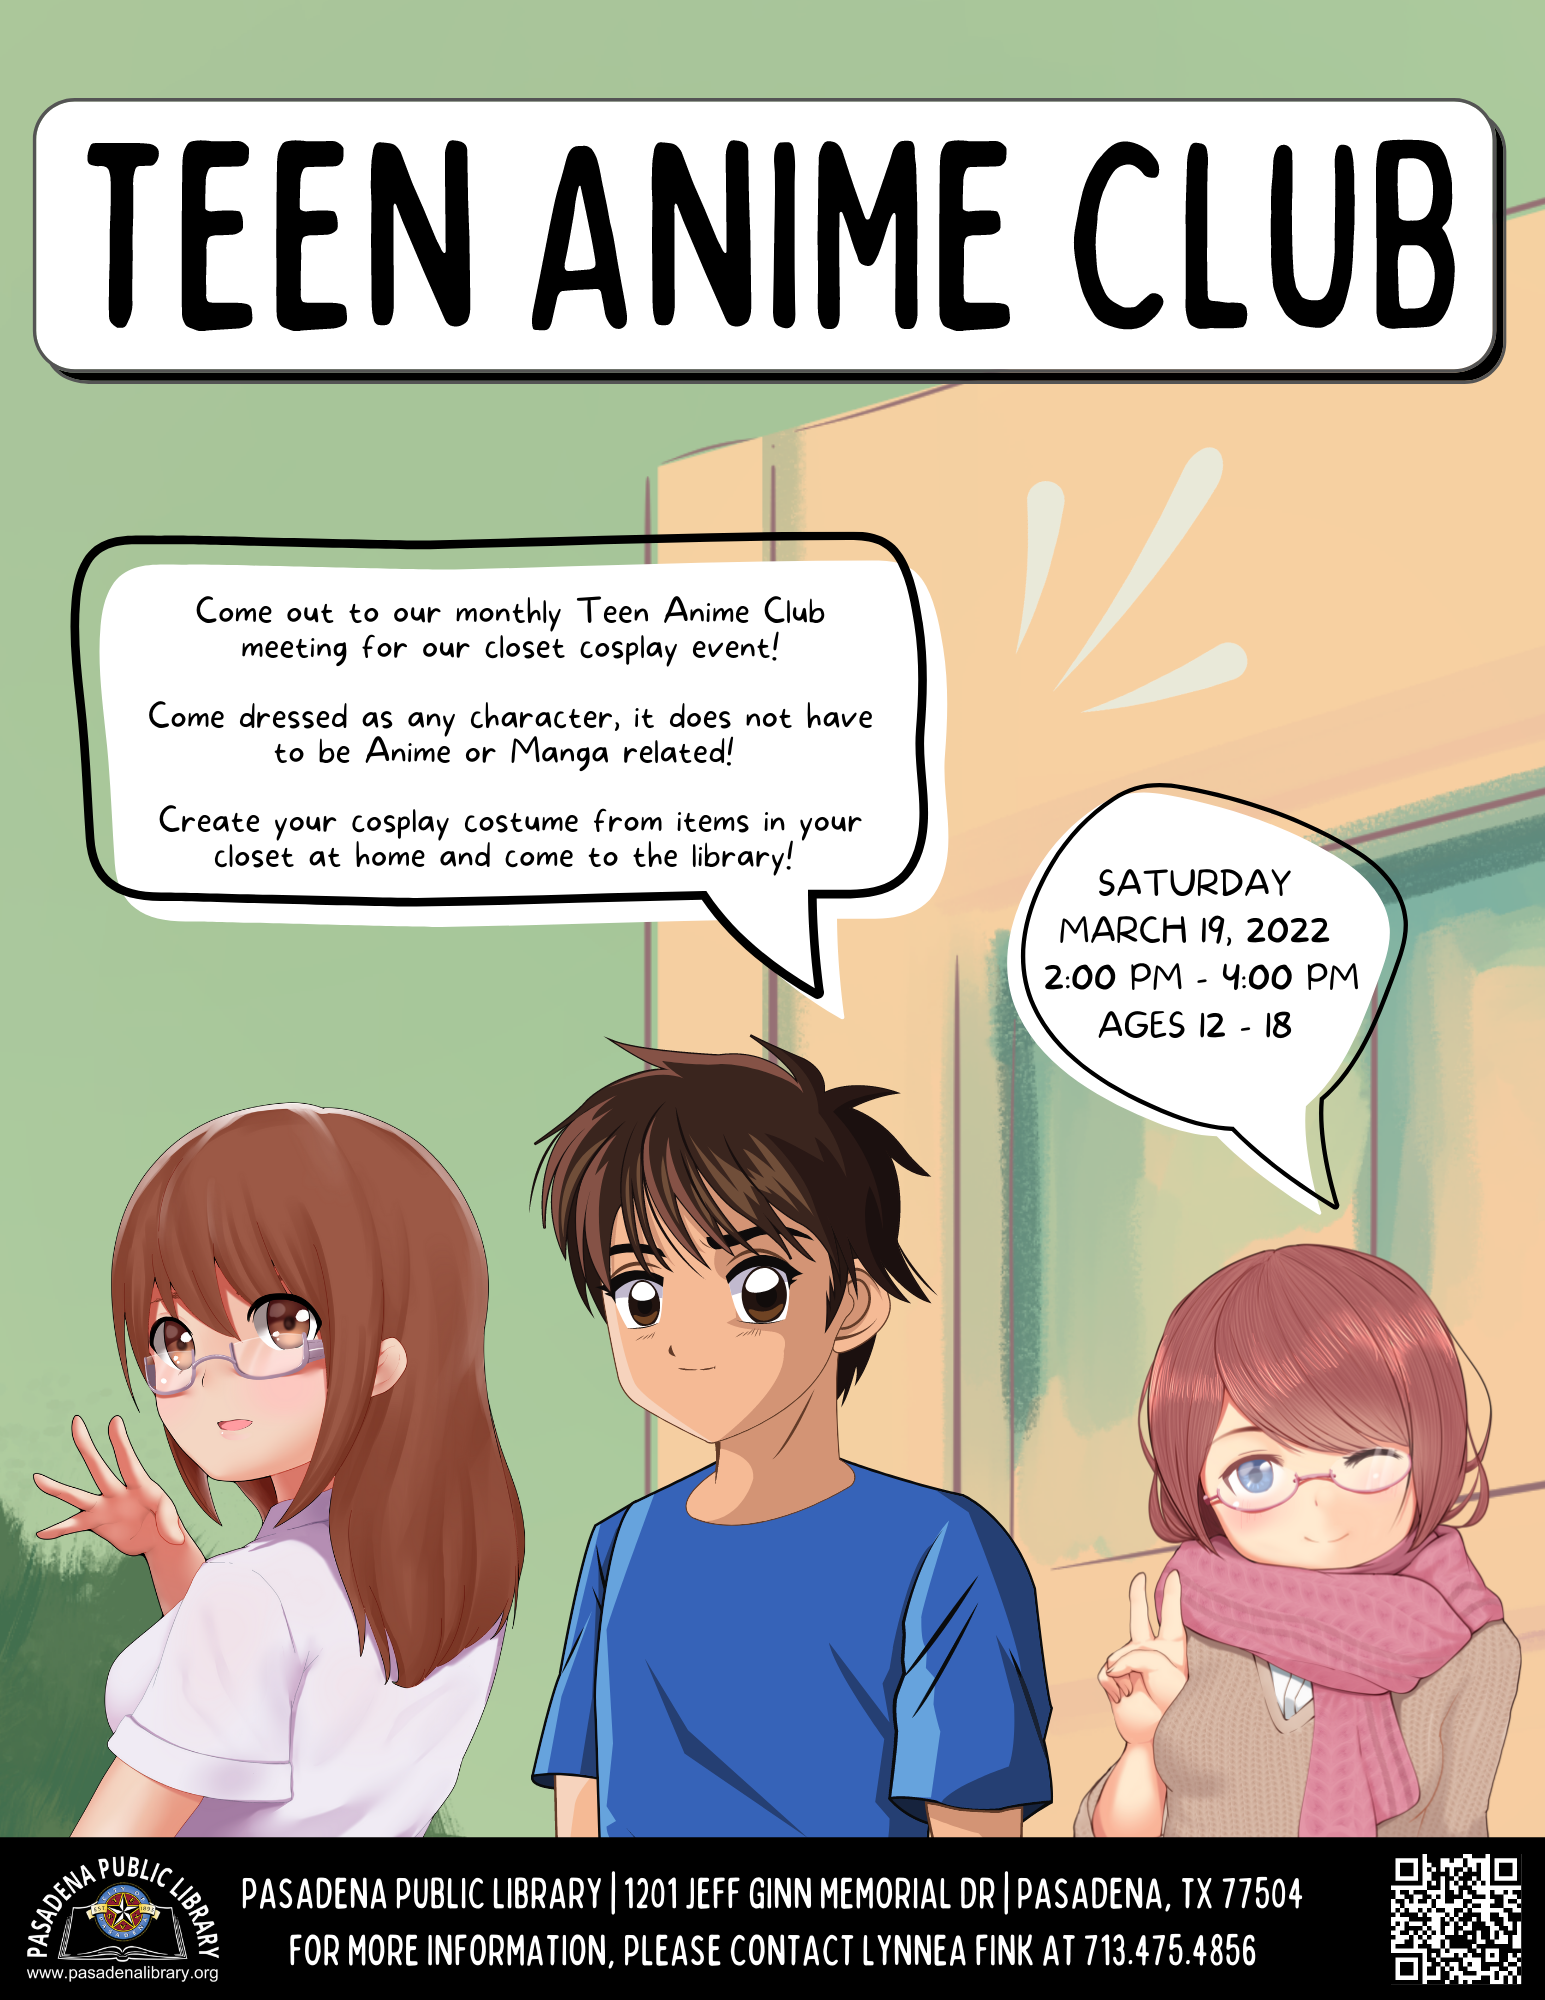 Come out to our monthly Teen Anime Club meeting for our closet cosplay event! Come dressed as any character, it does not have to be Anime or Manga related! Create your cosplay costume from items in your closet at home and come to the library! 